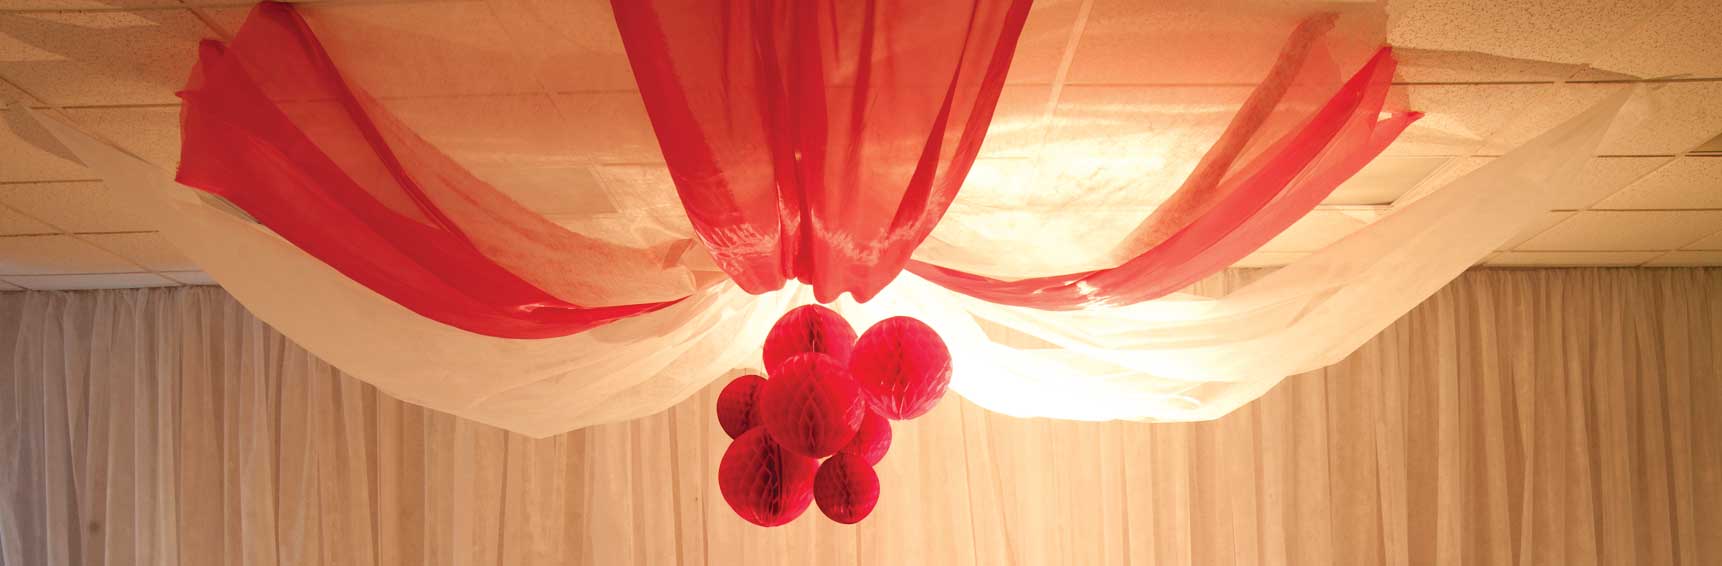 10 Ways to Use Fabric for Prom Decorations - Anderson's Blog